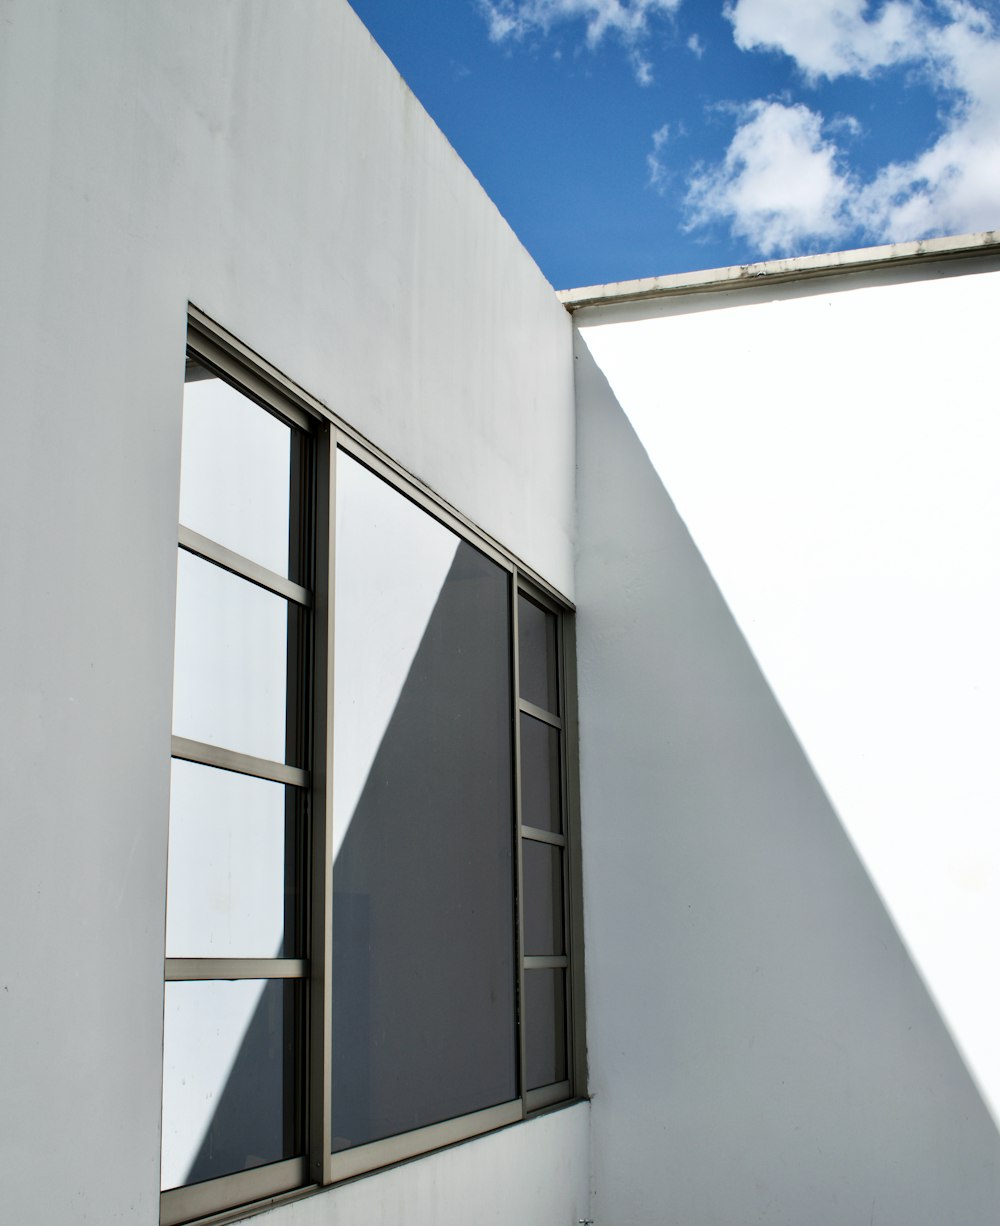 a white building with windows